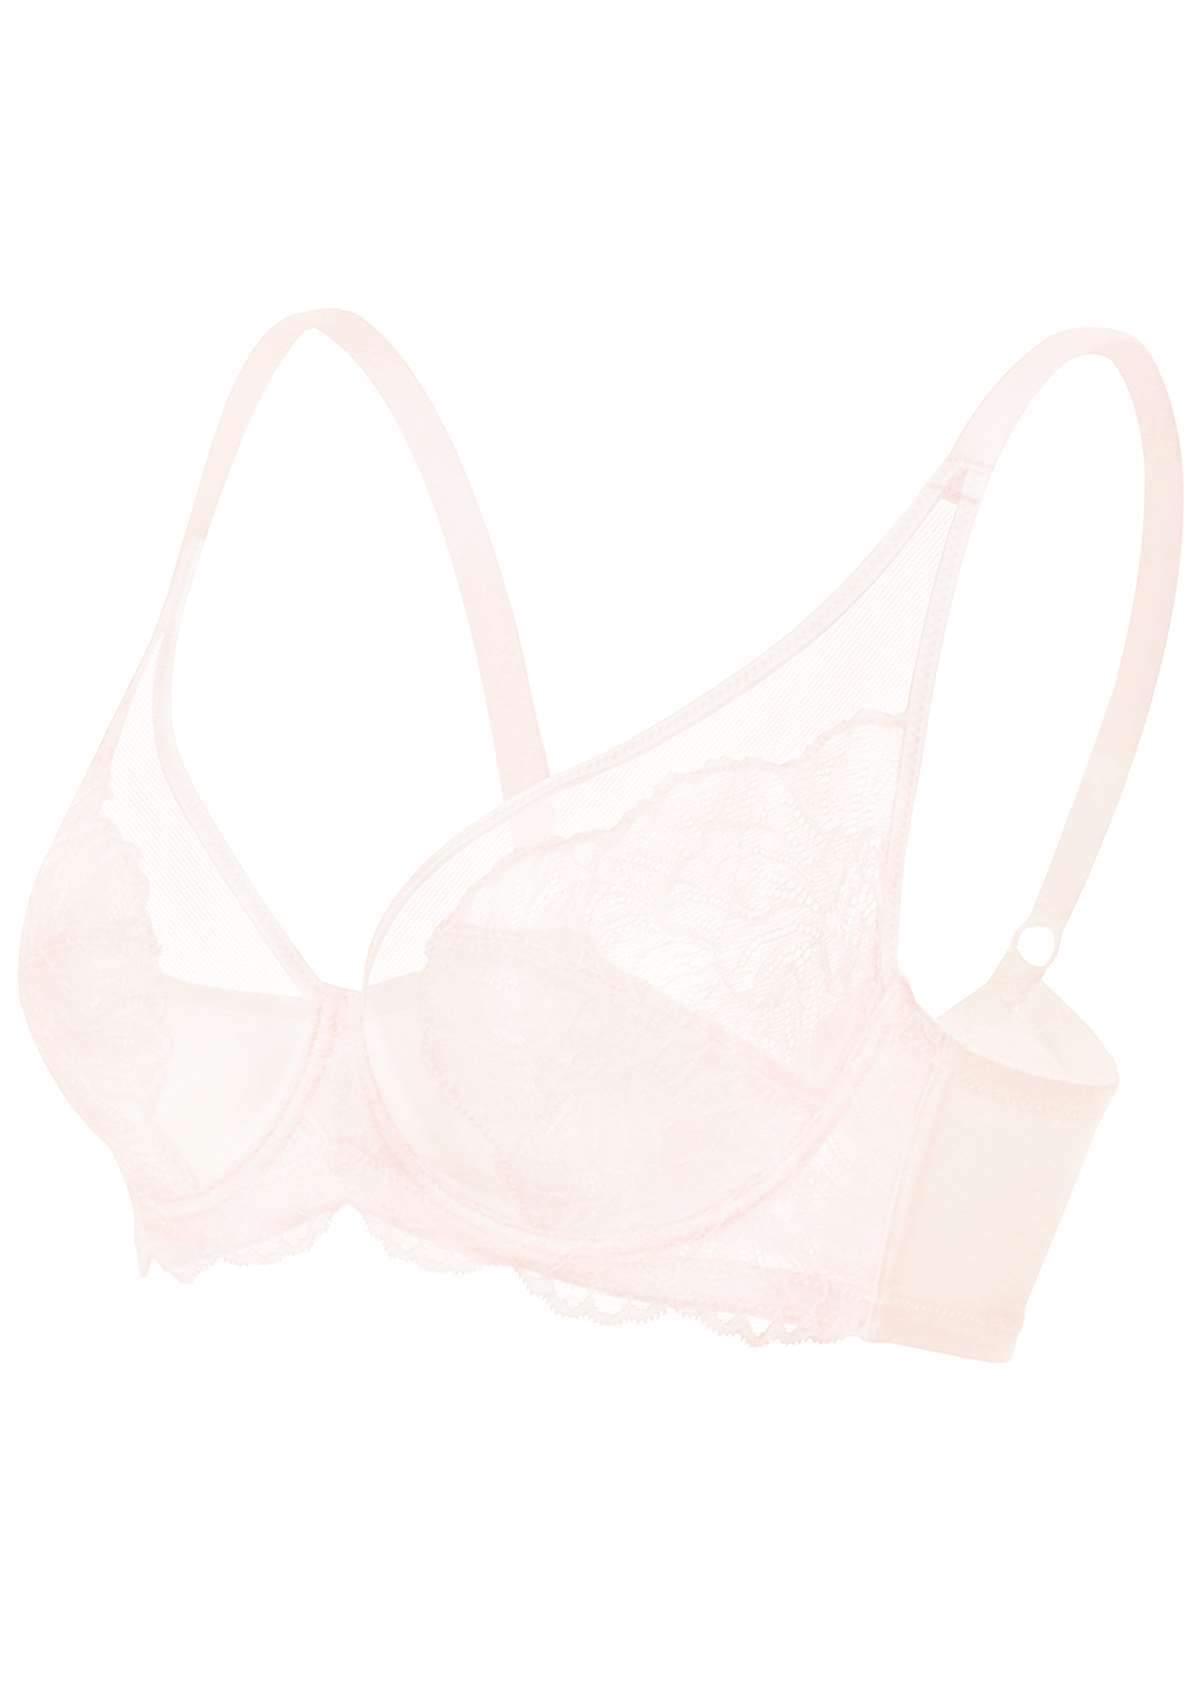 HSIA Blossom Sheer Lace Bra: Comfortable Underwire Bra For Big Busts - Dusty Peach / 36 / I